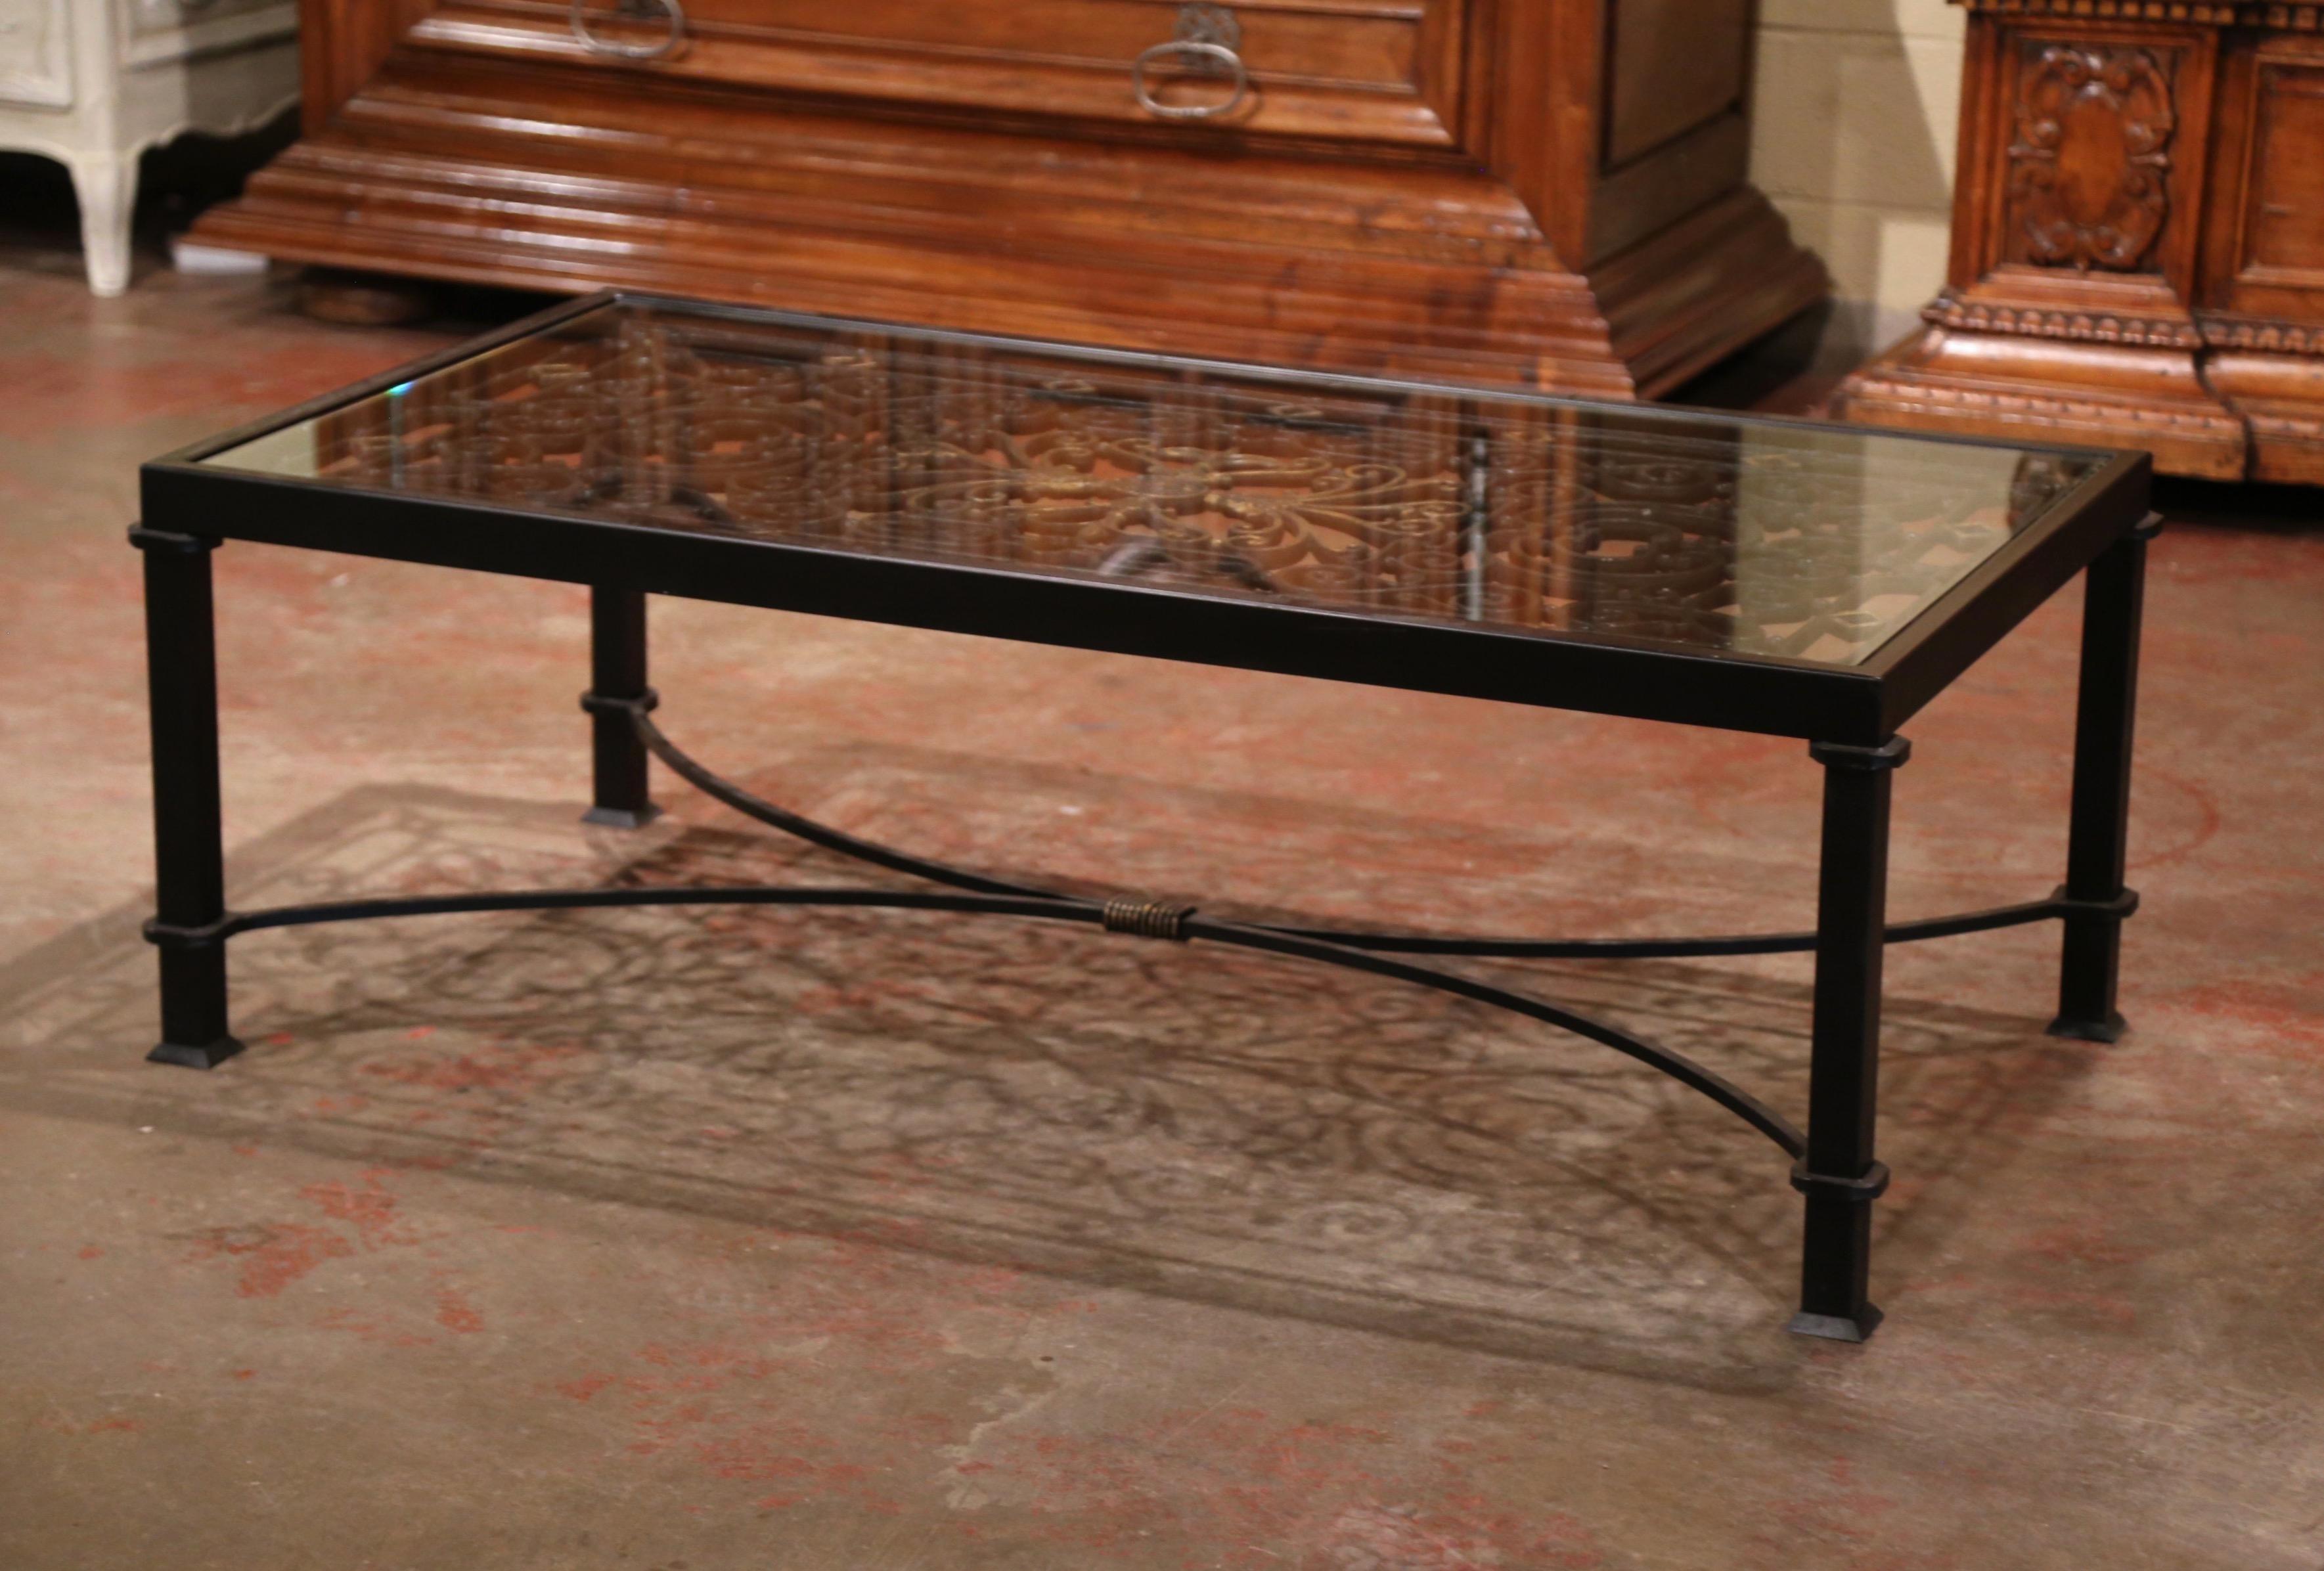 Hand-Crafted Glass Top Painted Iron Coffee Table Made with 19th Century French Gate Balcony